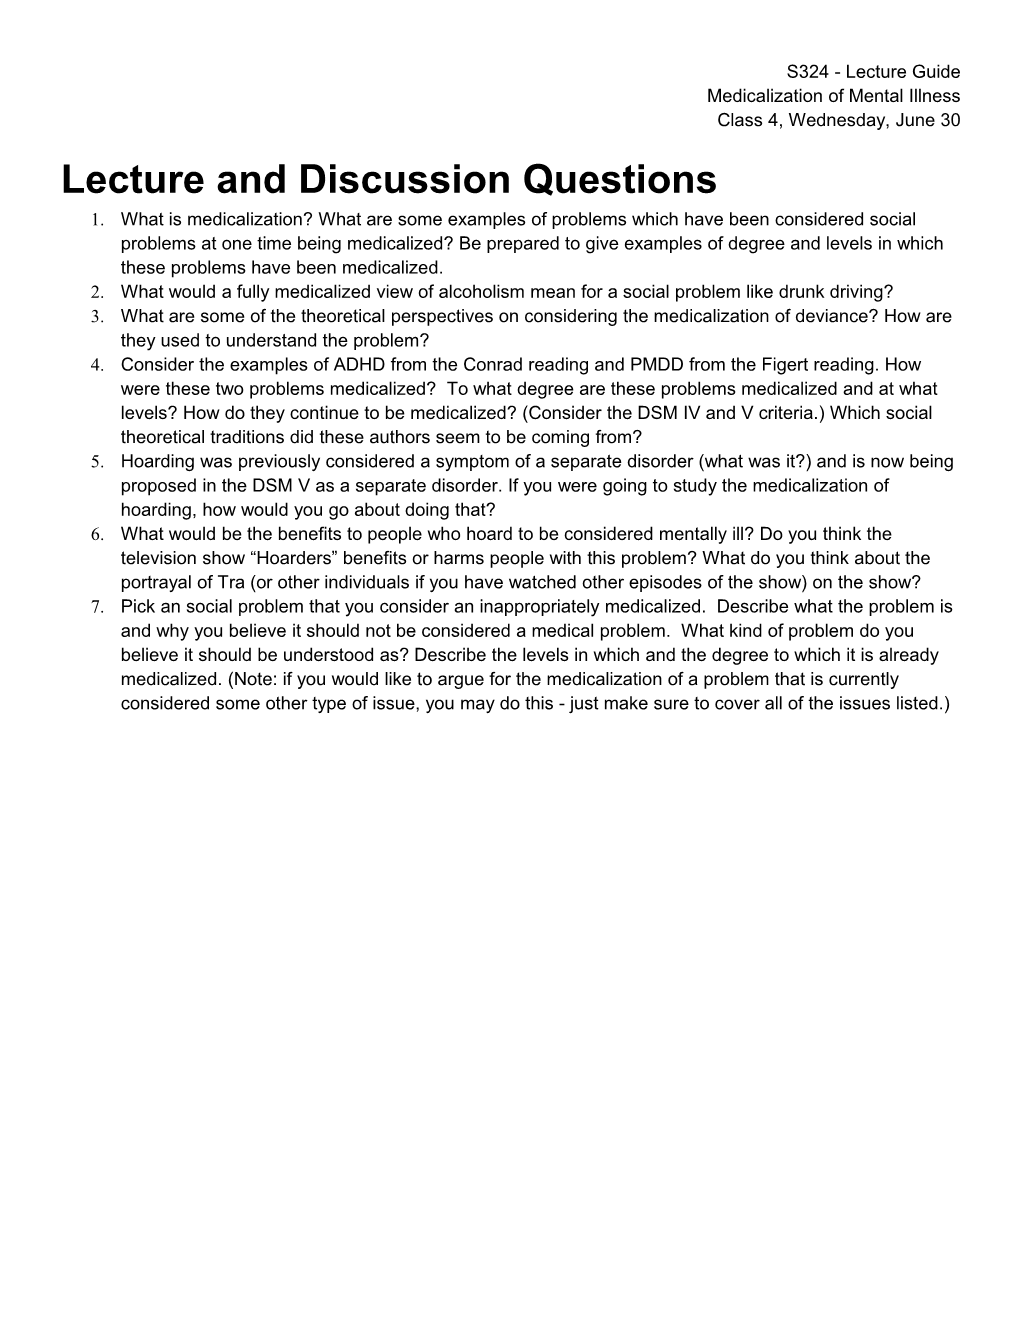 Lecture and Discussion Questions